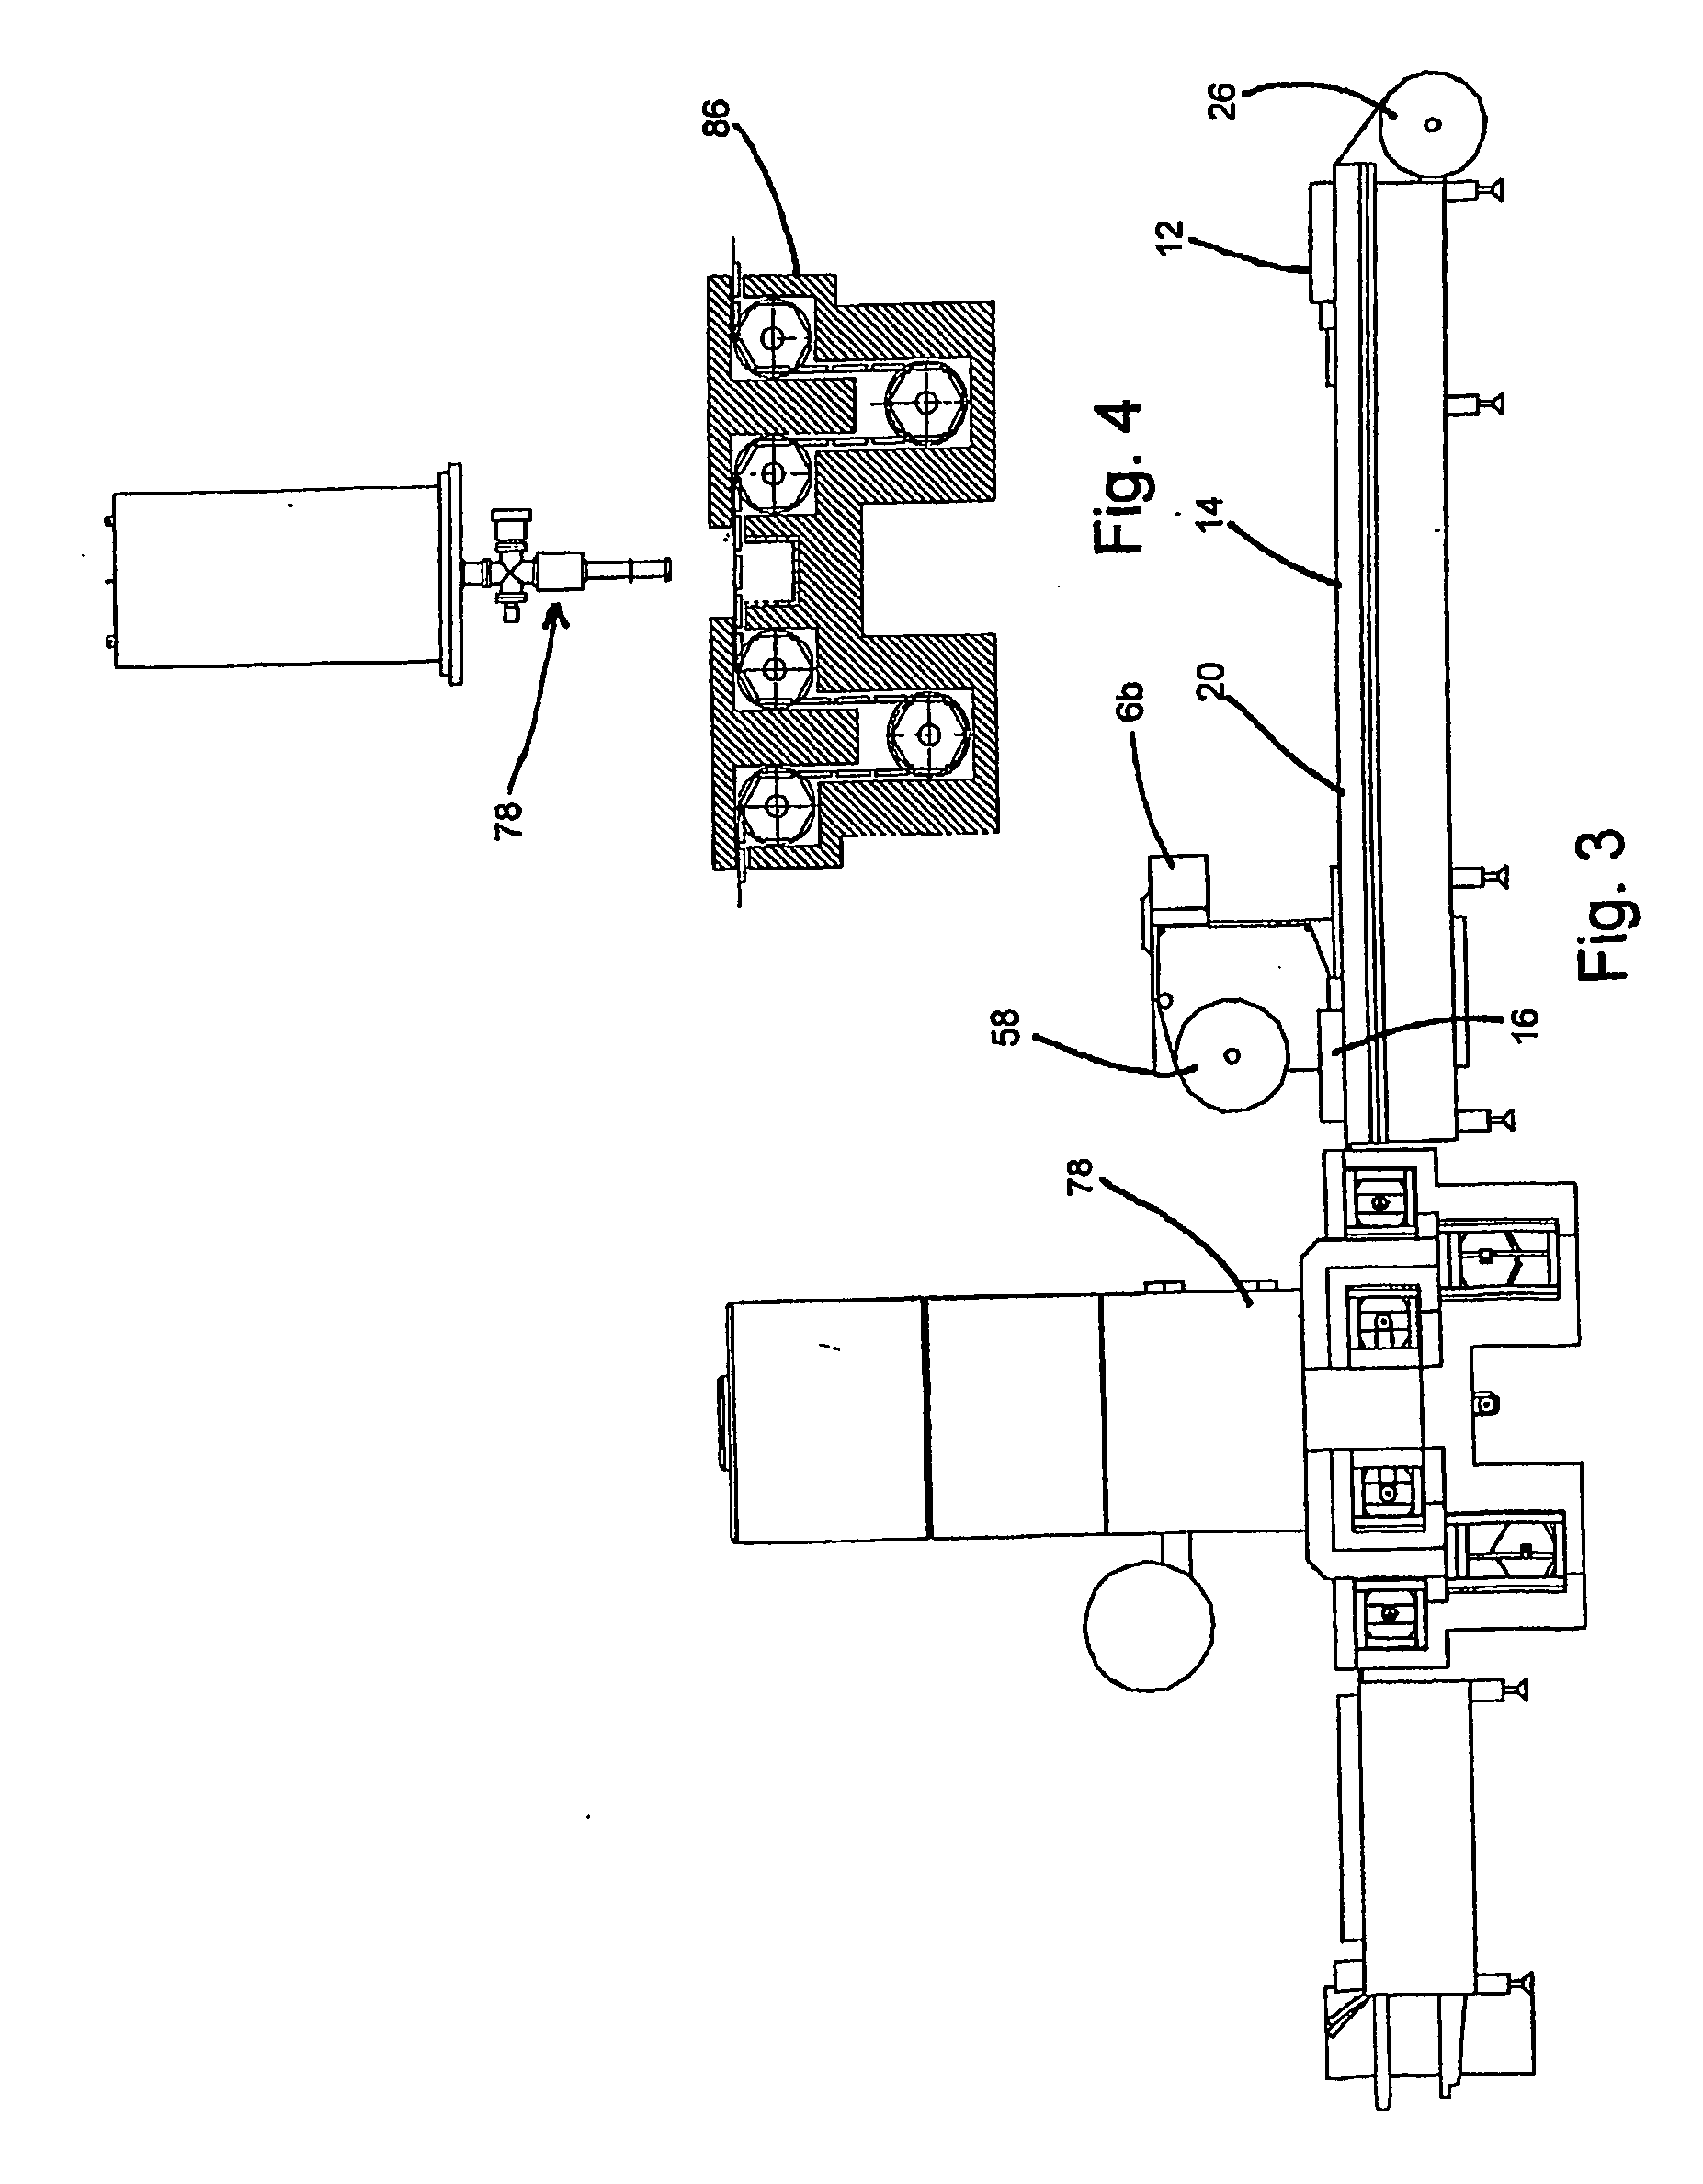 Inline processing and irradiation system